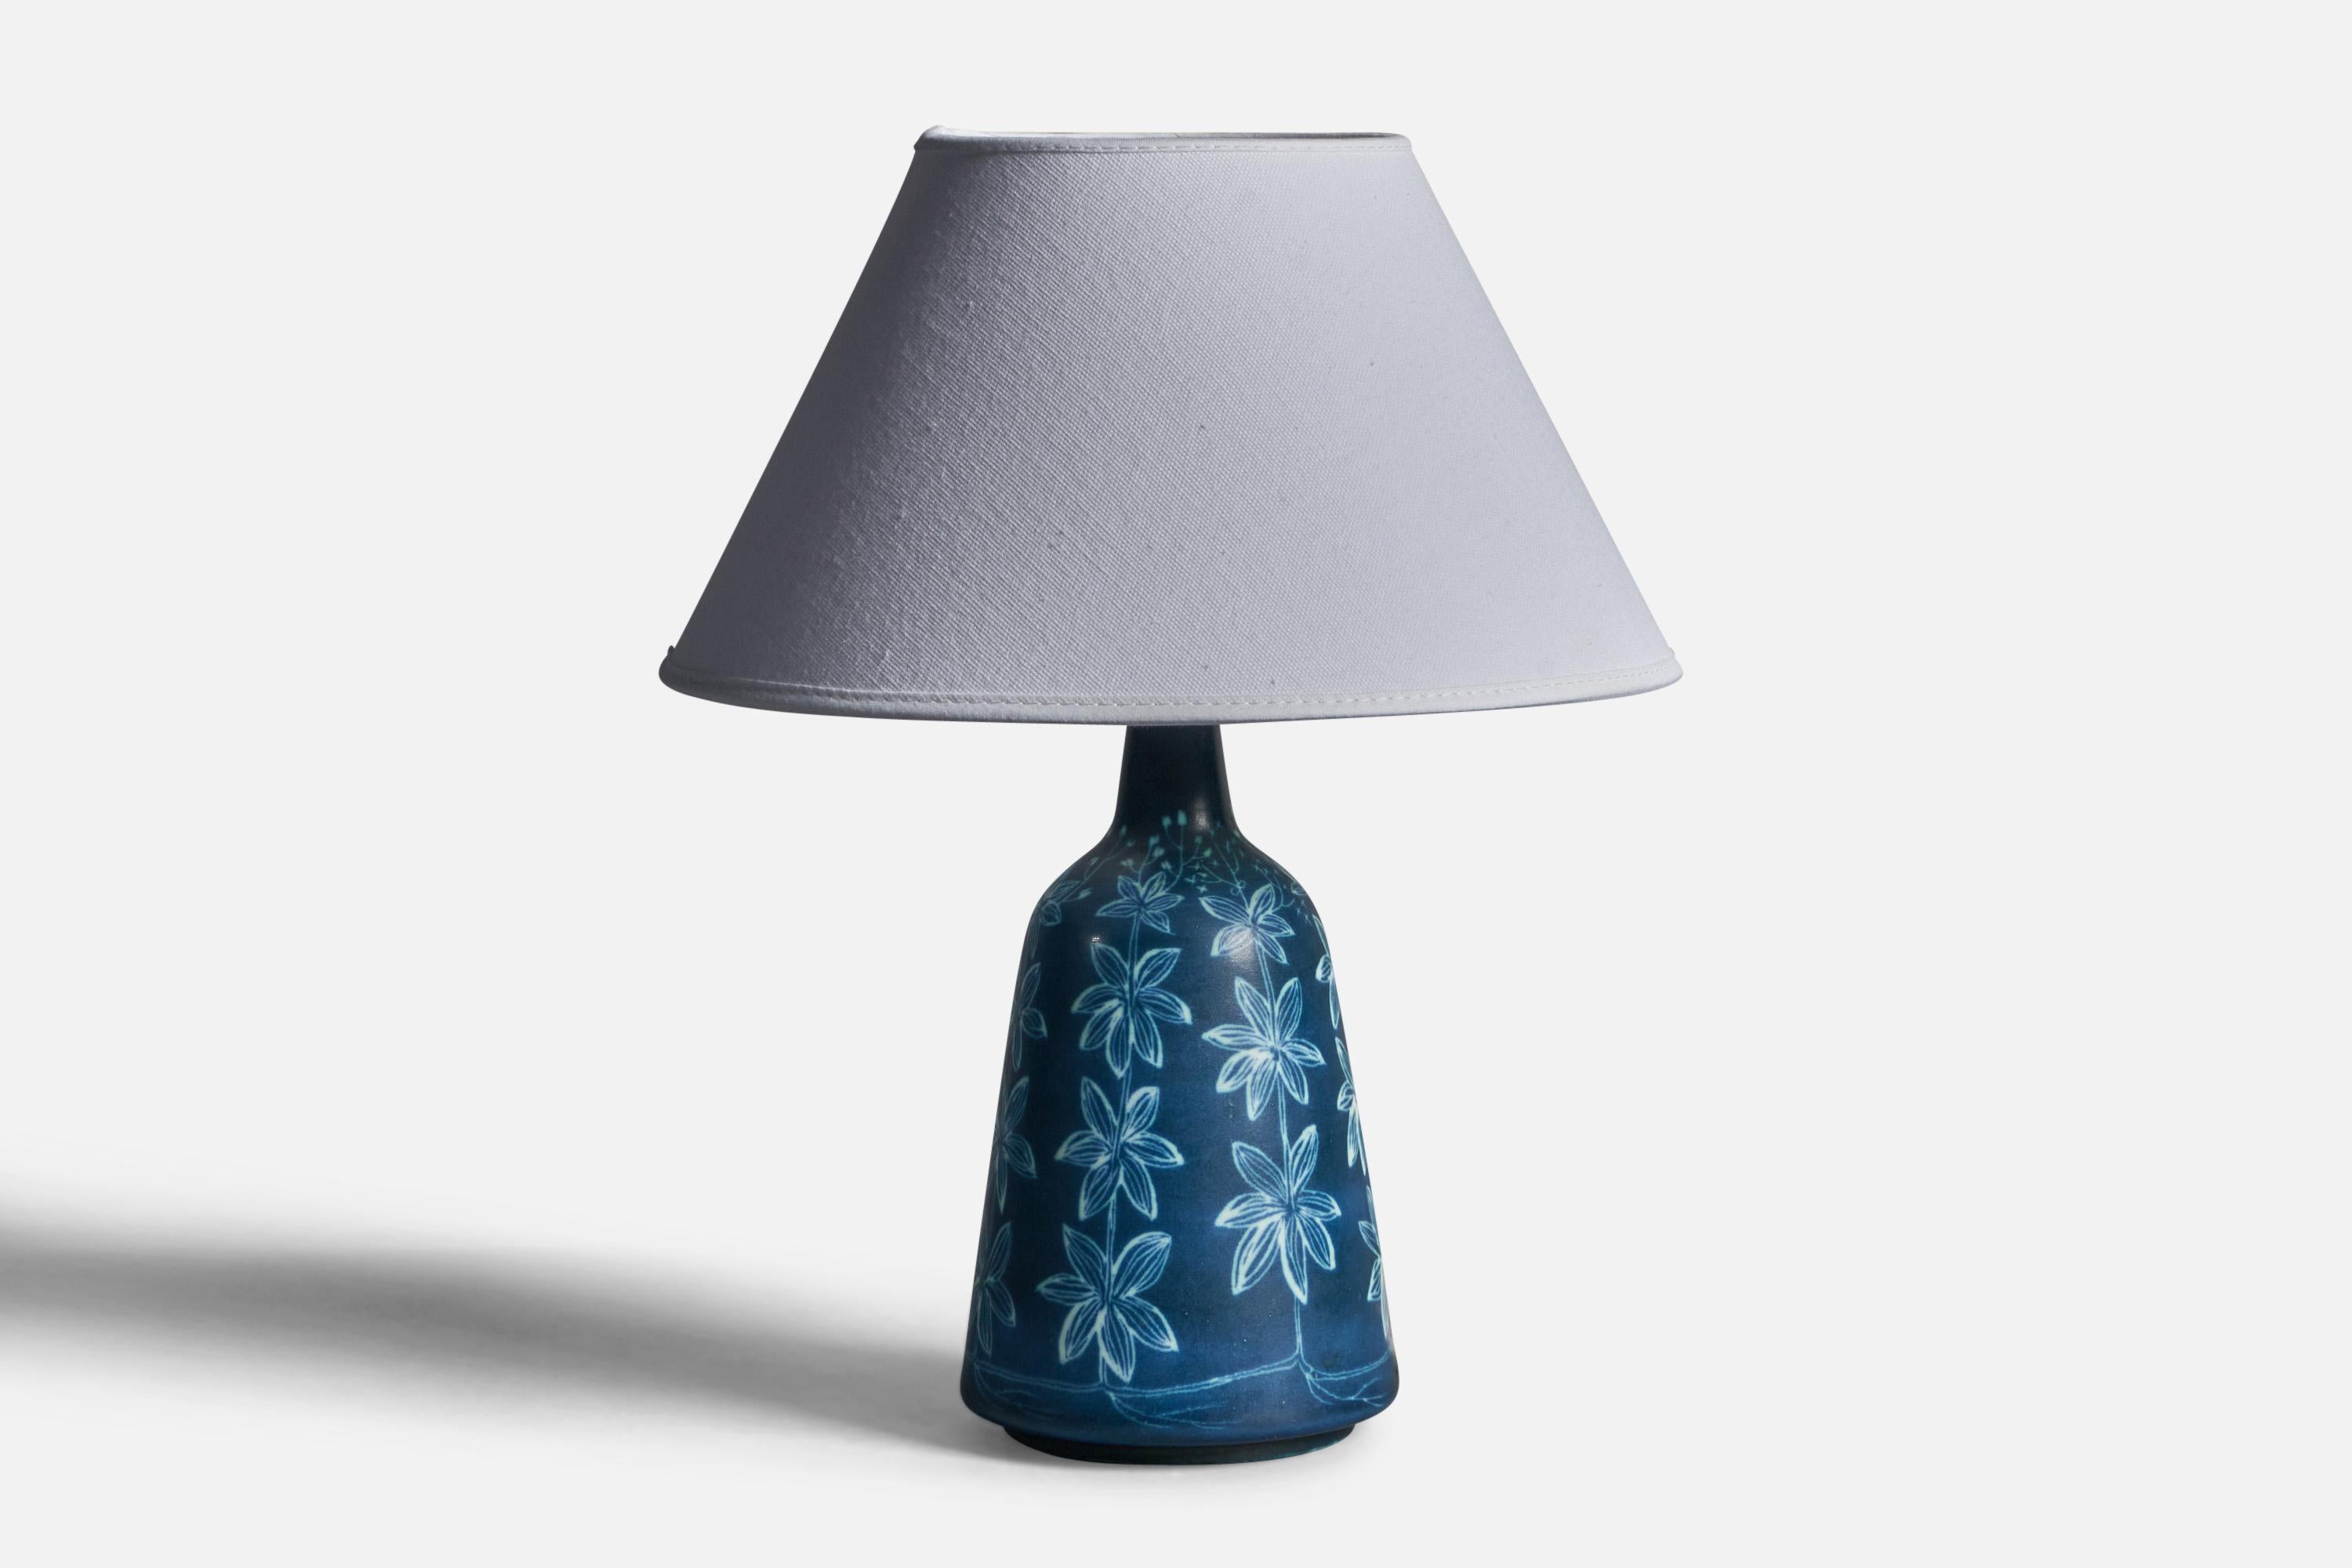 A blue-glazed painted table lamp designed by Hertha Bengtsson and produced by Rörstrand, Sweden, 1950s.

Dimensions of Lamp (inches): 10